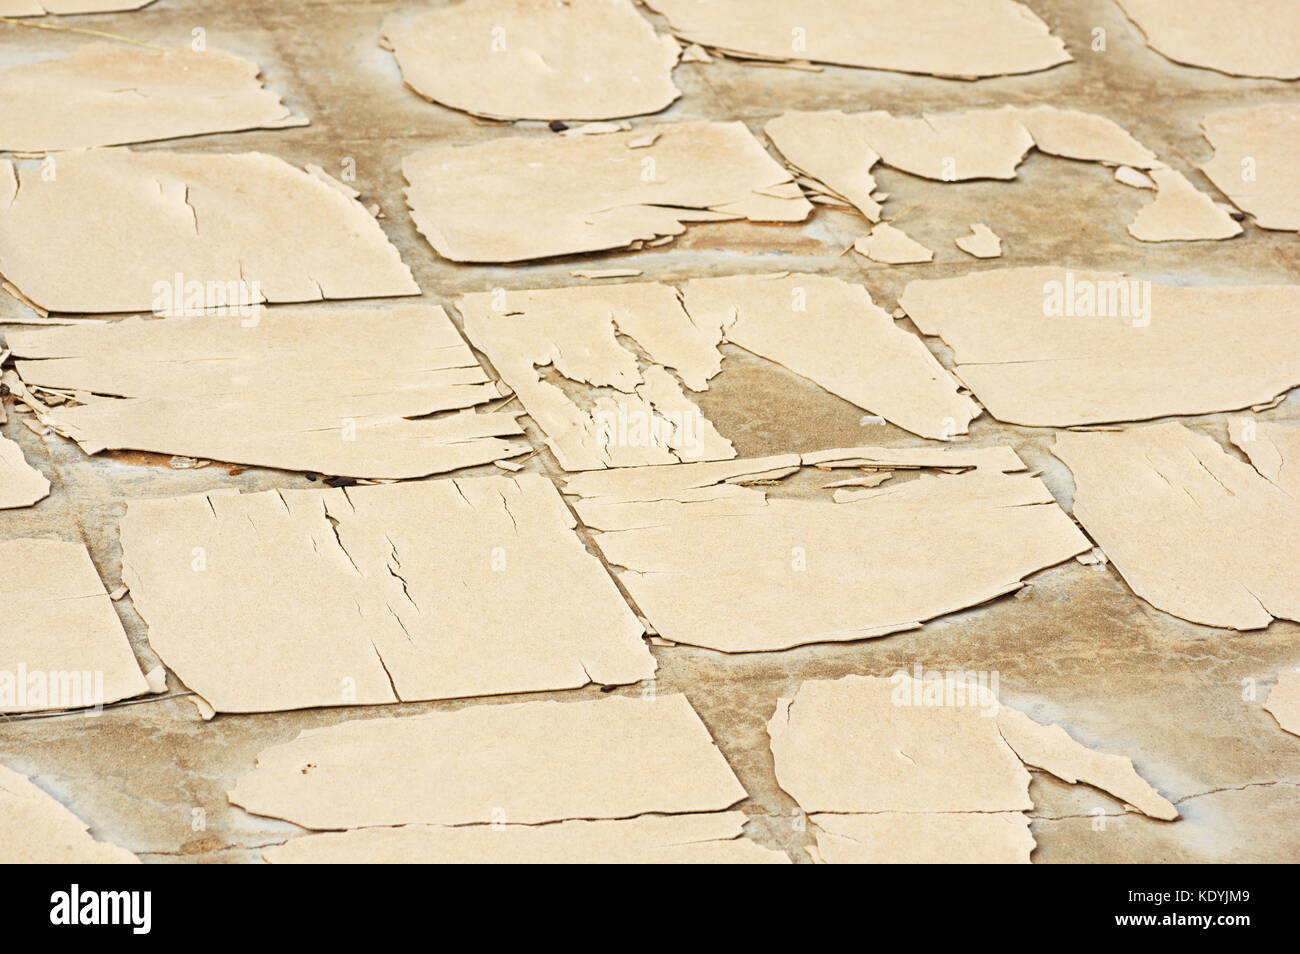 old weathered linoleum tile floor with cracked and broken tiles on concrete Stock Photo